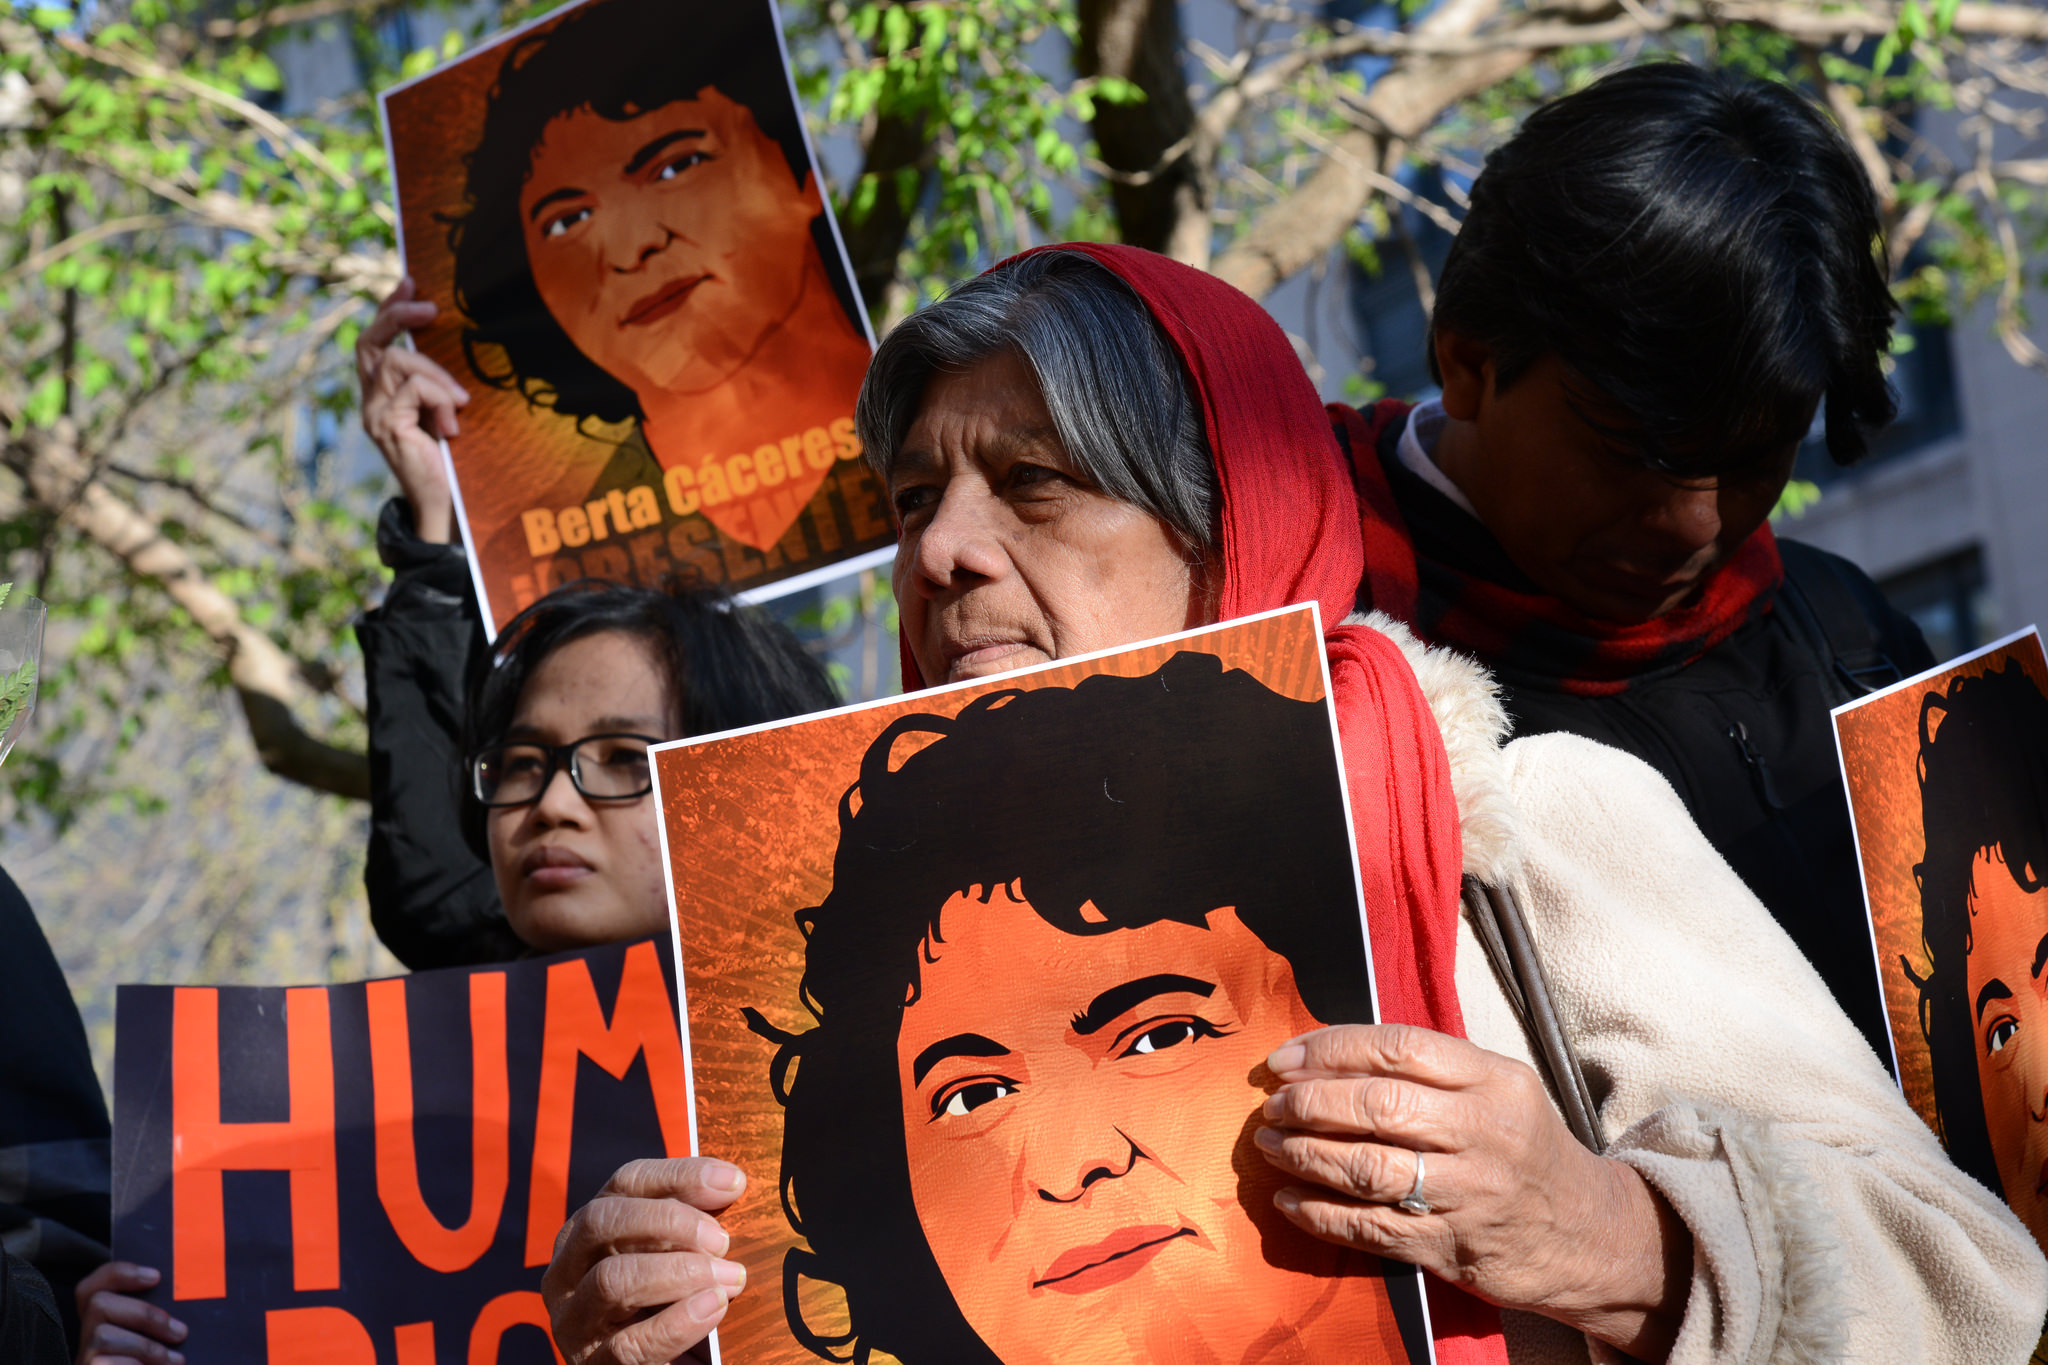 Berta Cáceres Lives On, And So Does Violence By Honduran Government and Dam Company